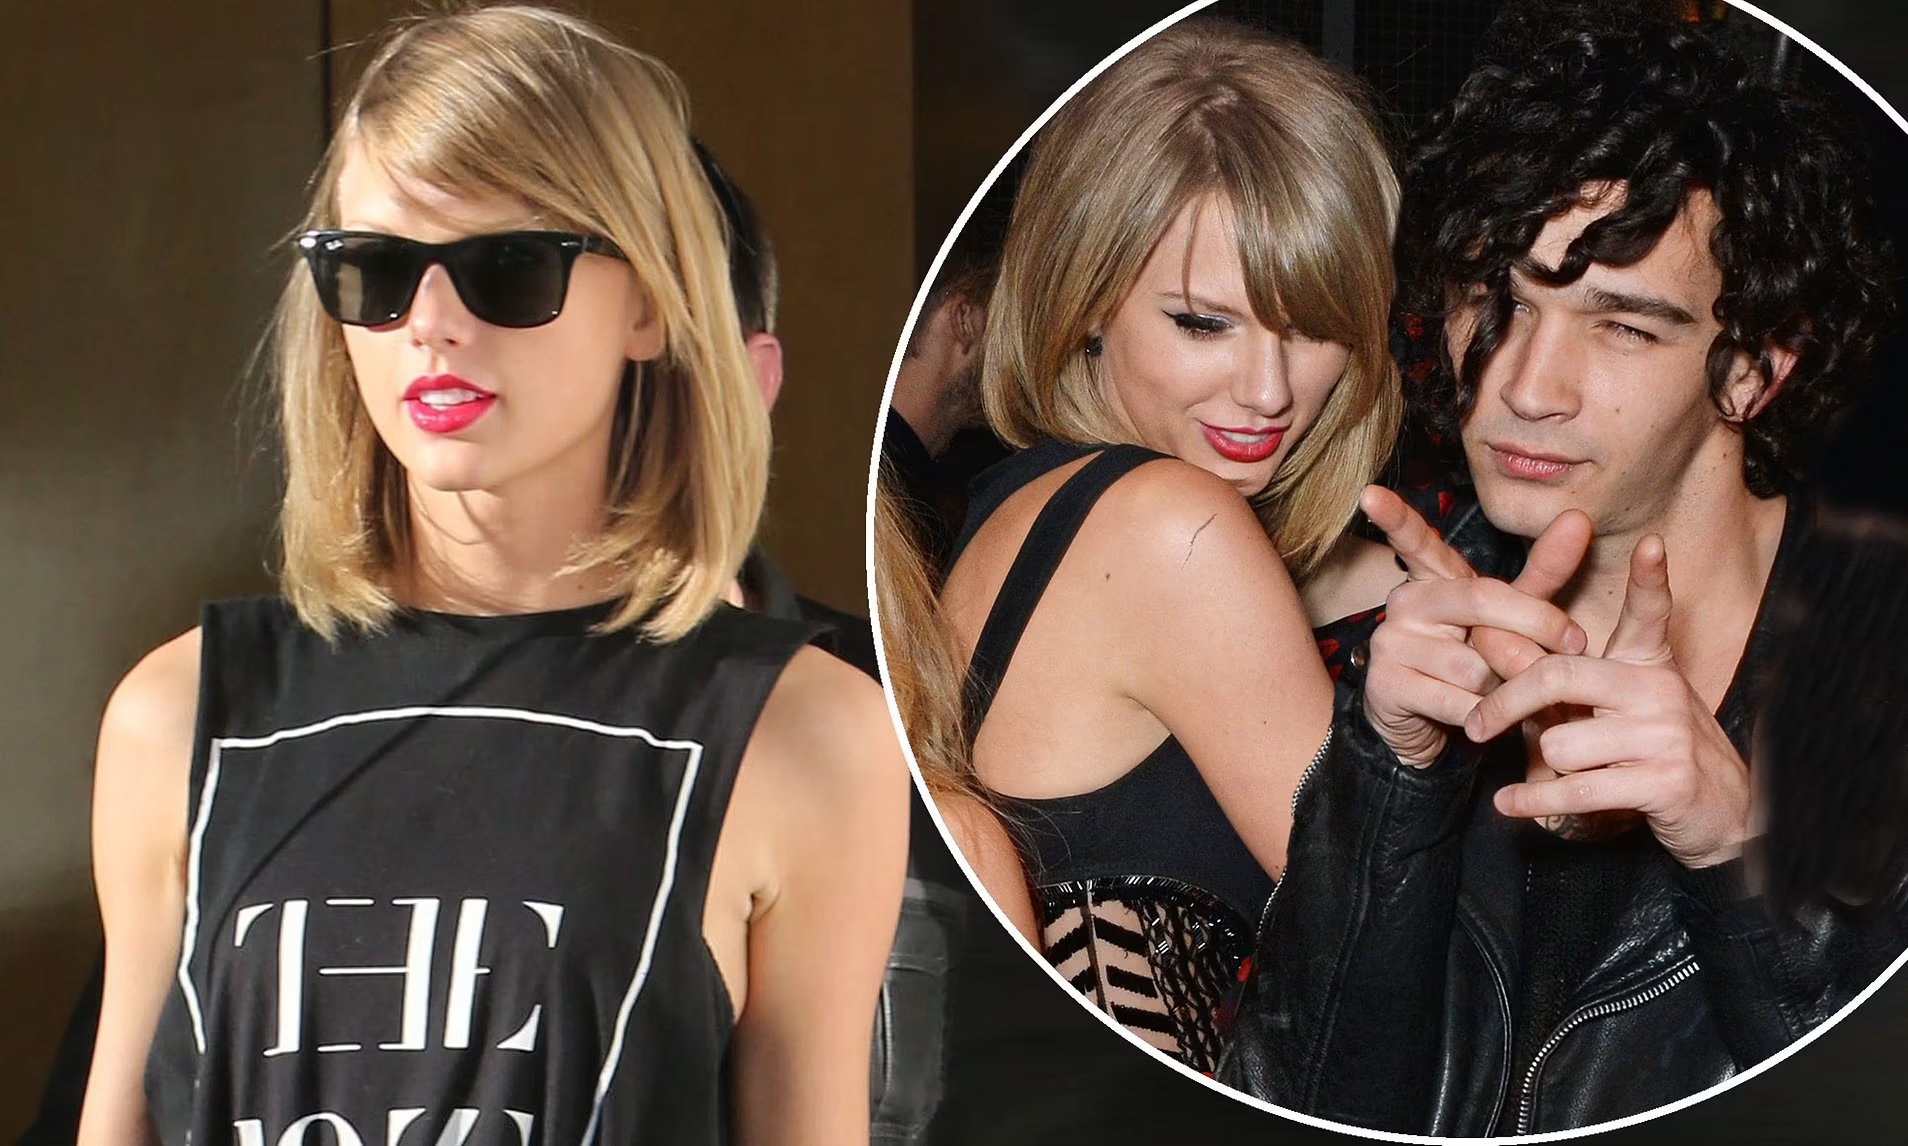 Taylor Swift and Matty Healy’s relationship status clarified after report claims pair rekindled romance